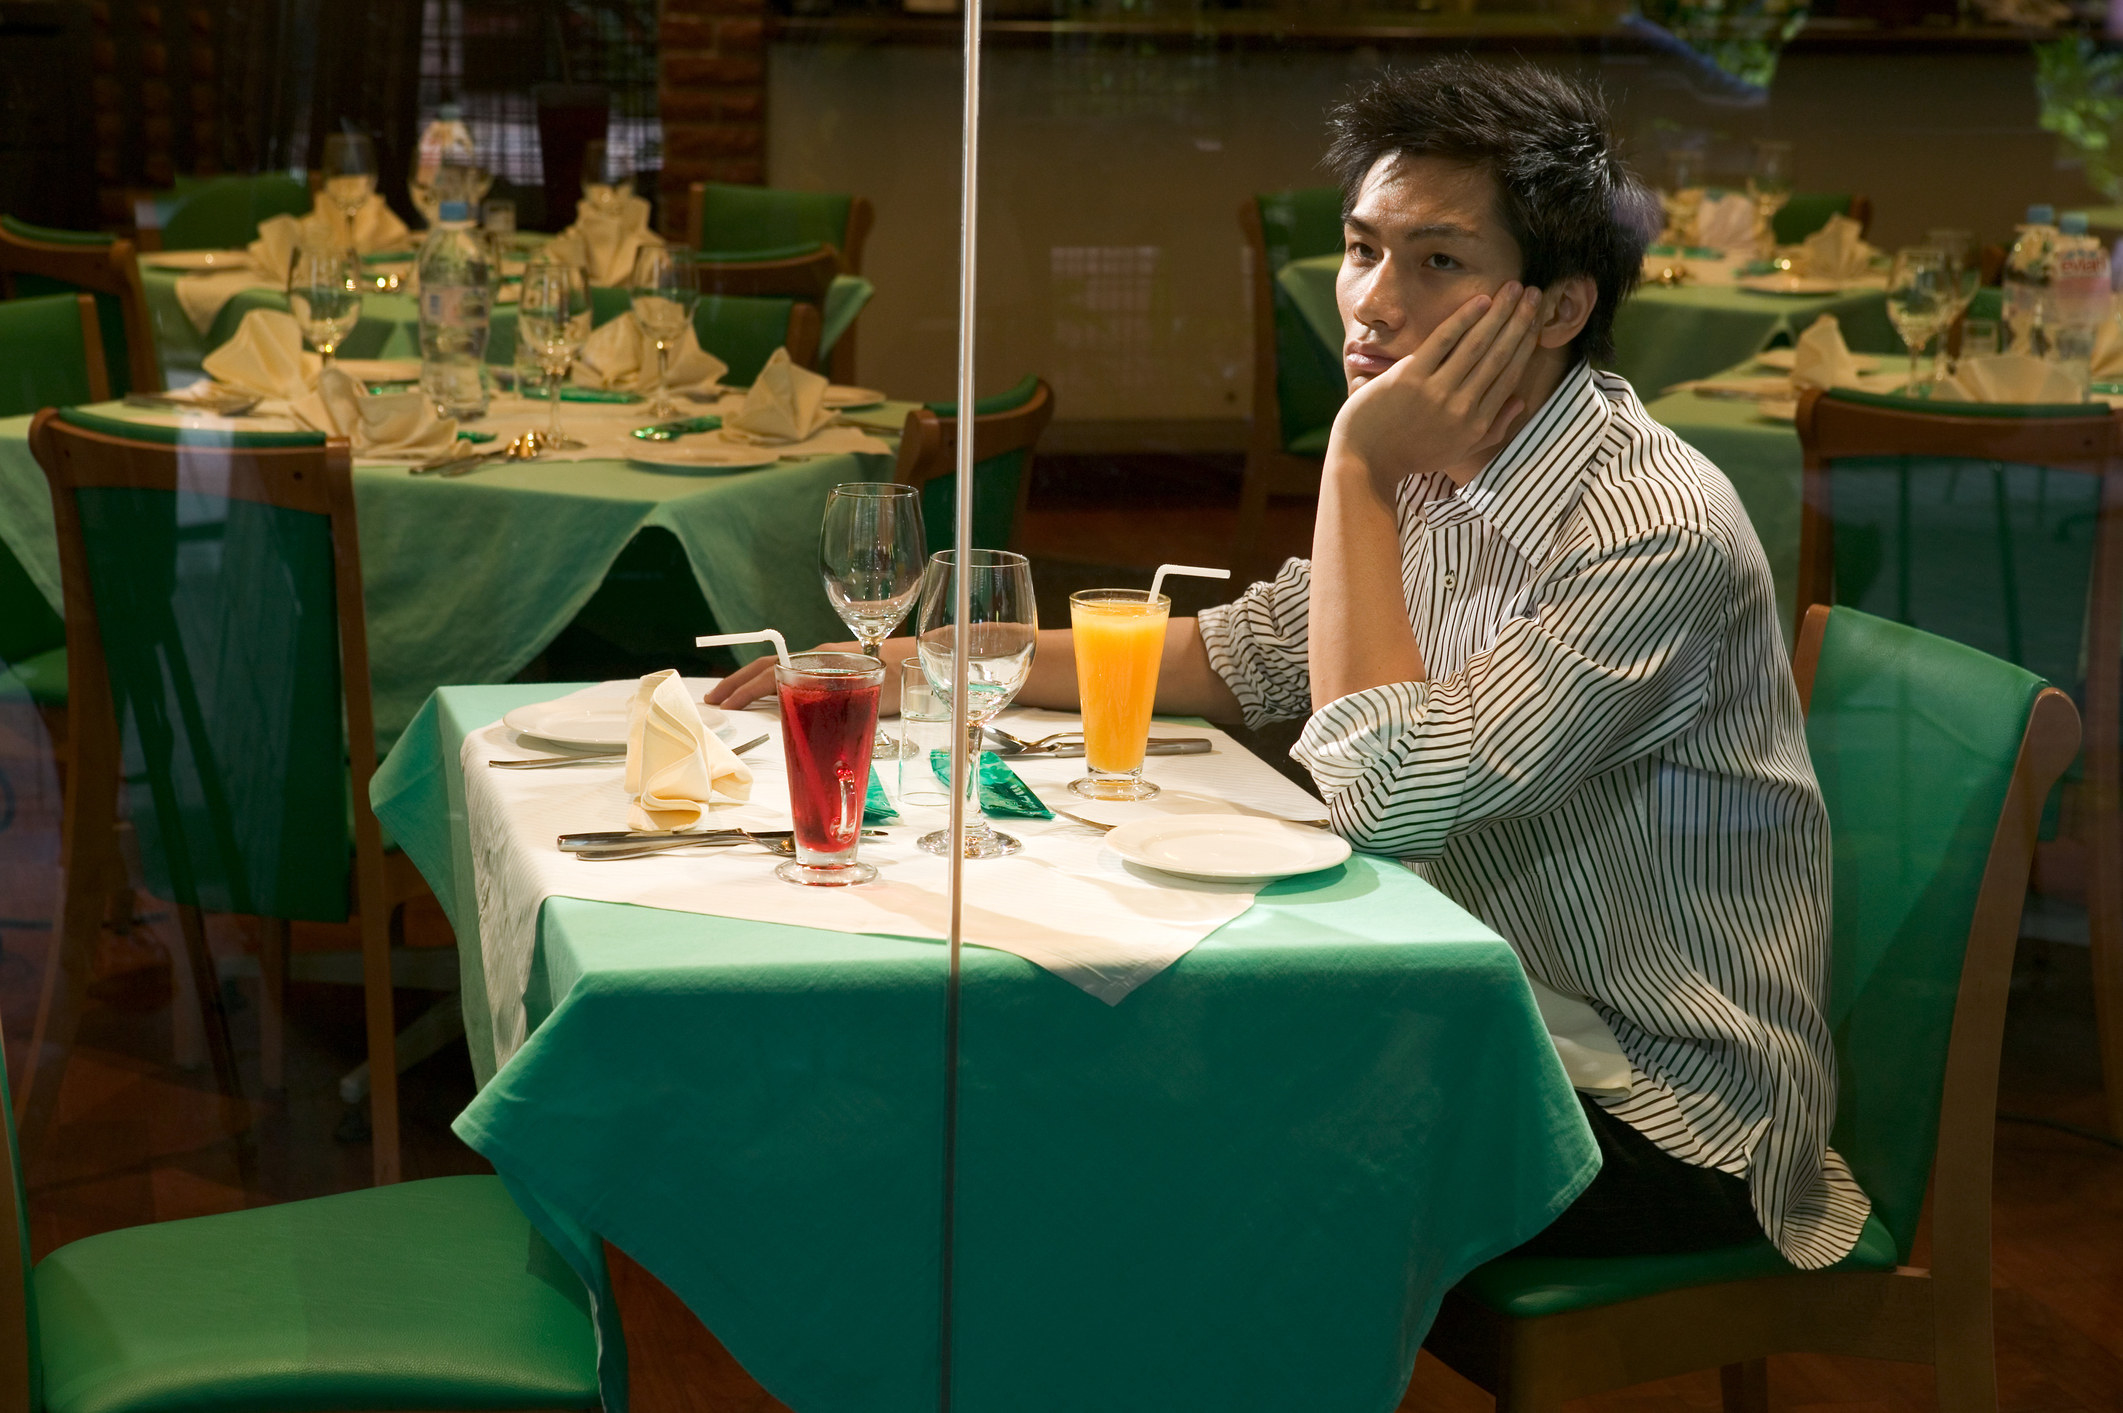 man sits alone at a table for two